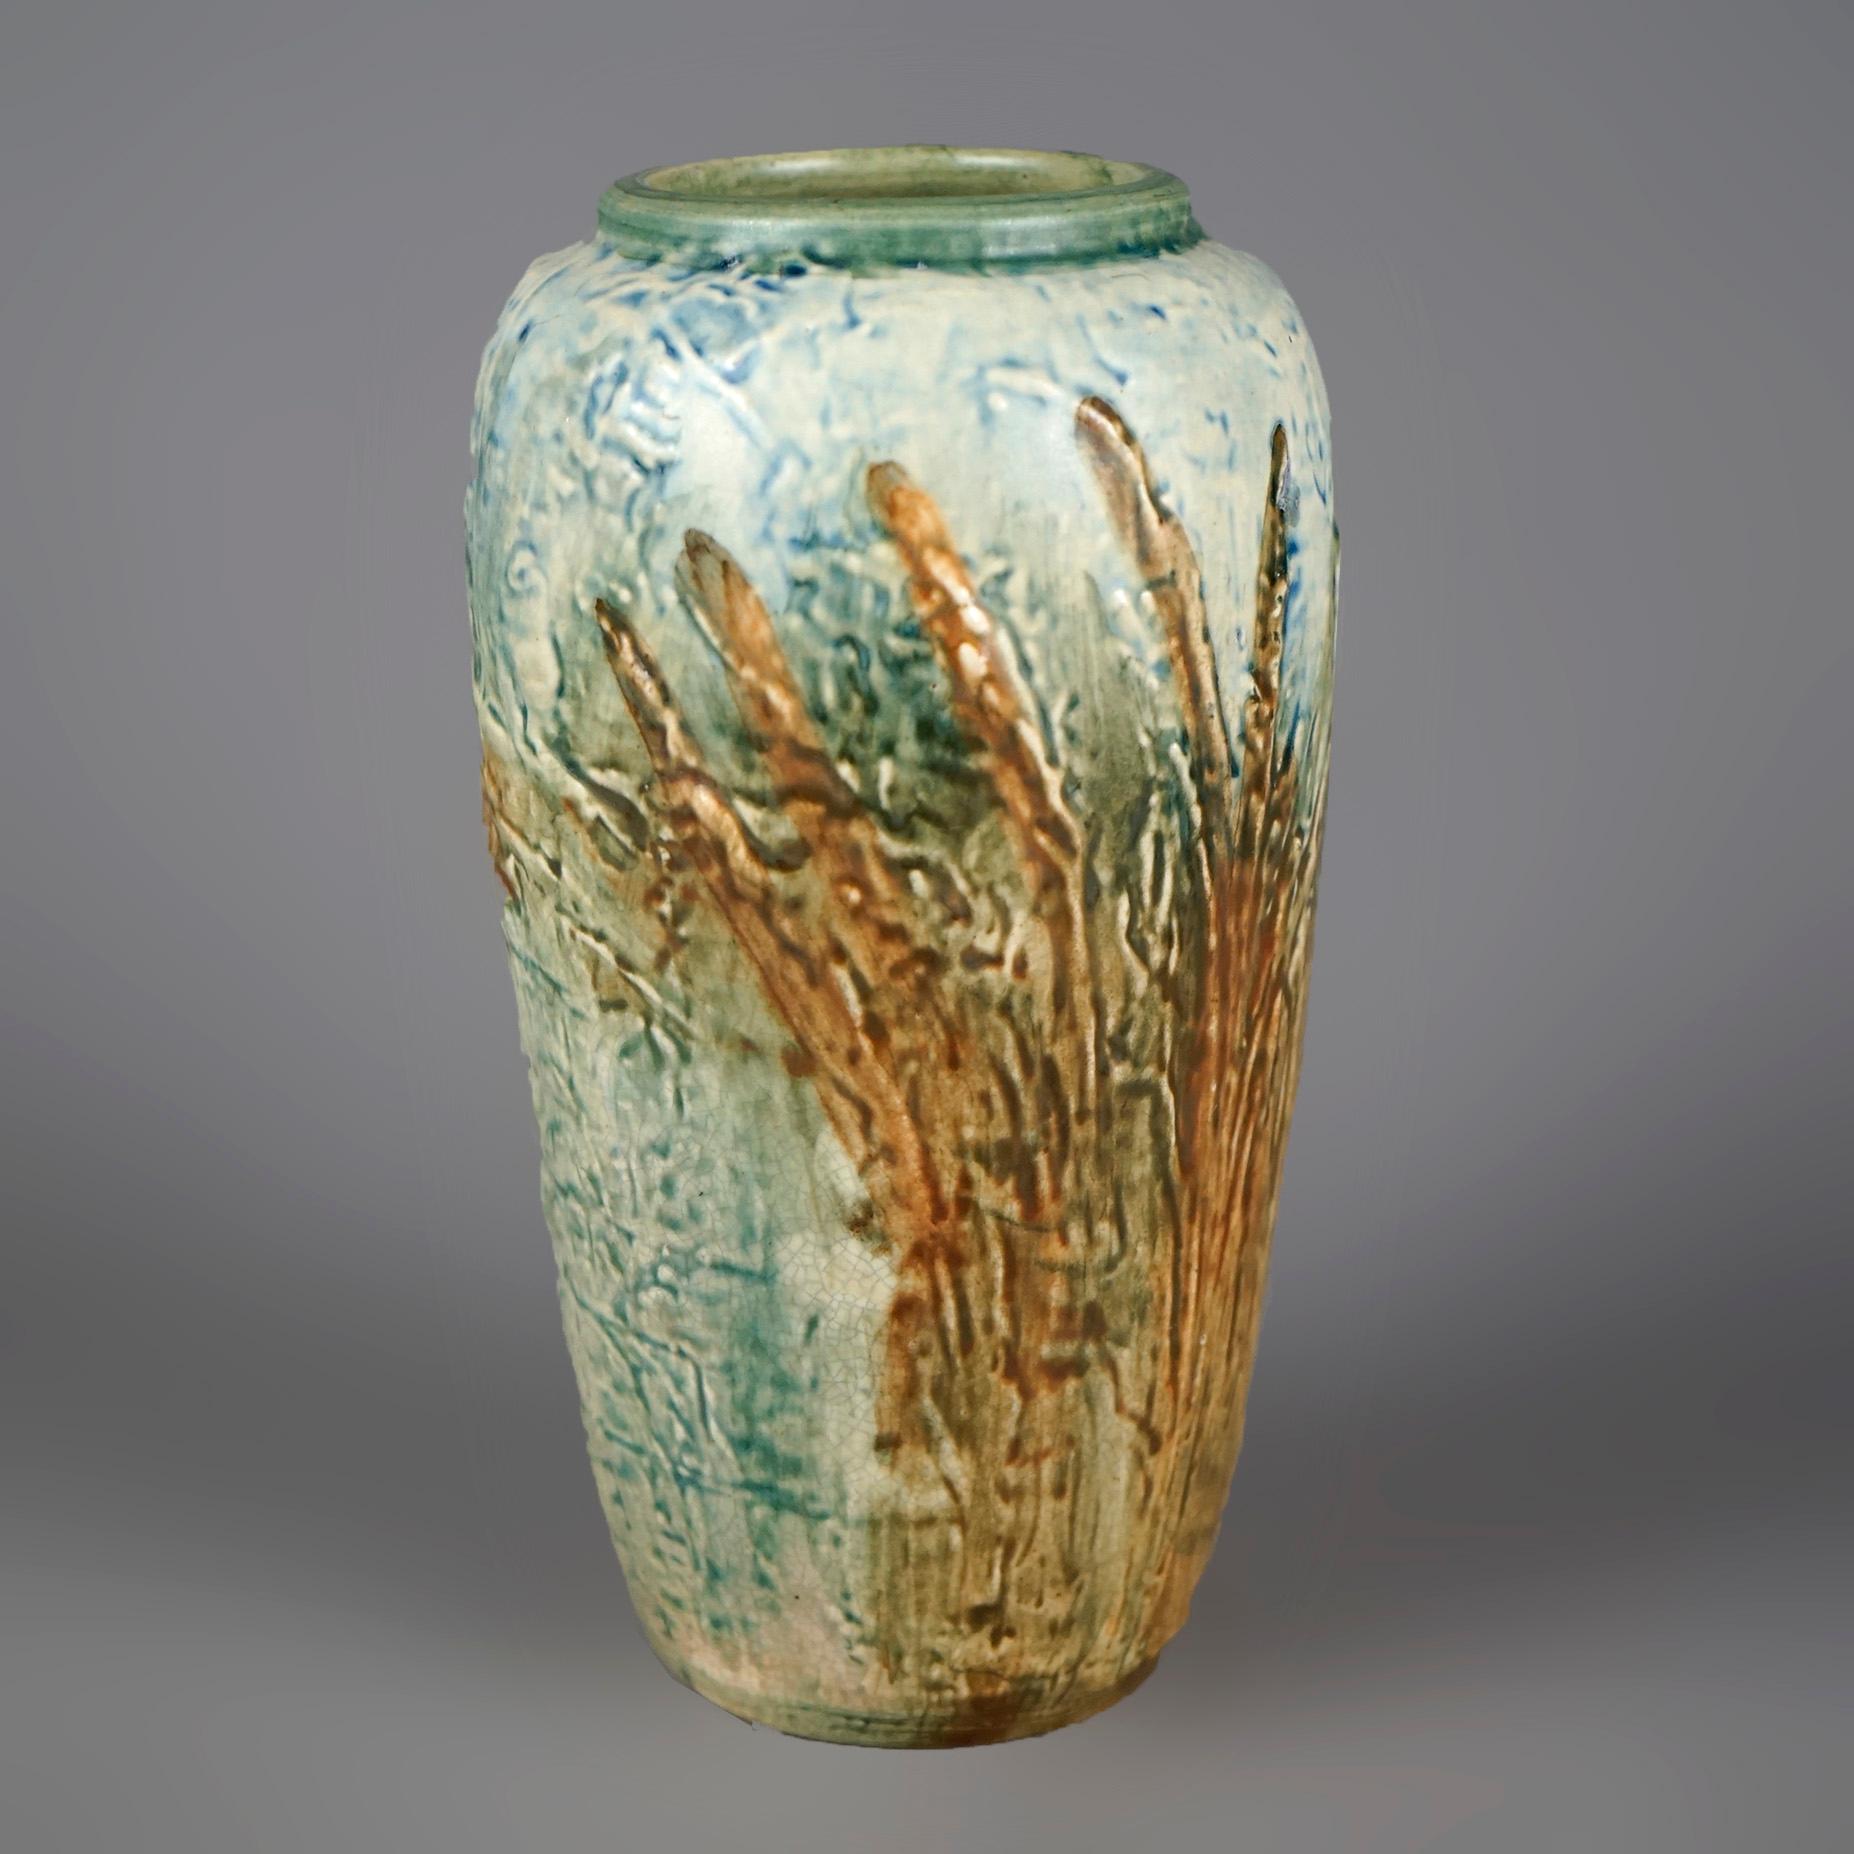 Arts and Crafts Antique Weller Glendale Art Pottery Vase with High Relief Birds & Nest, c1920